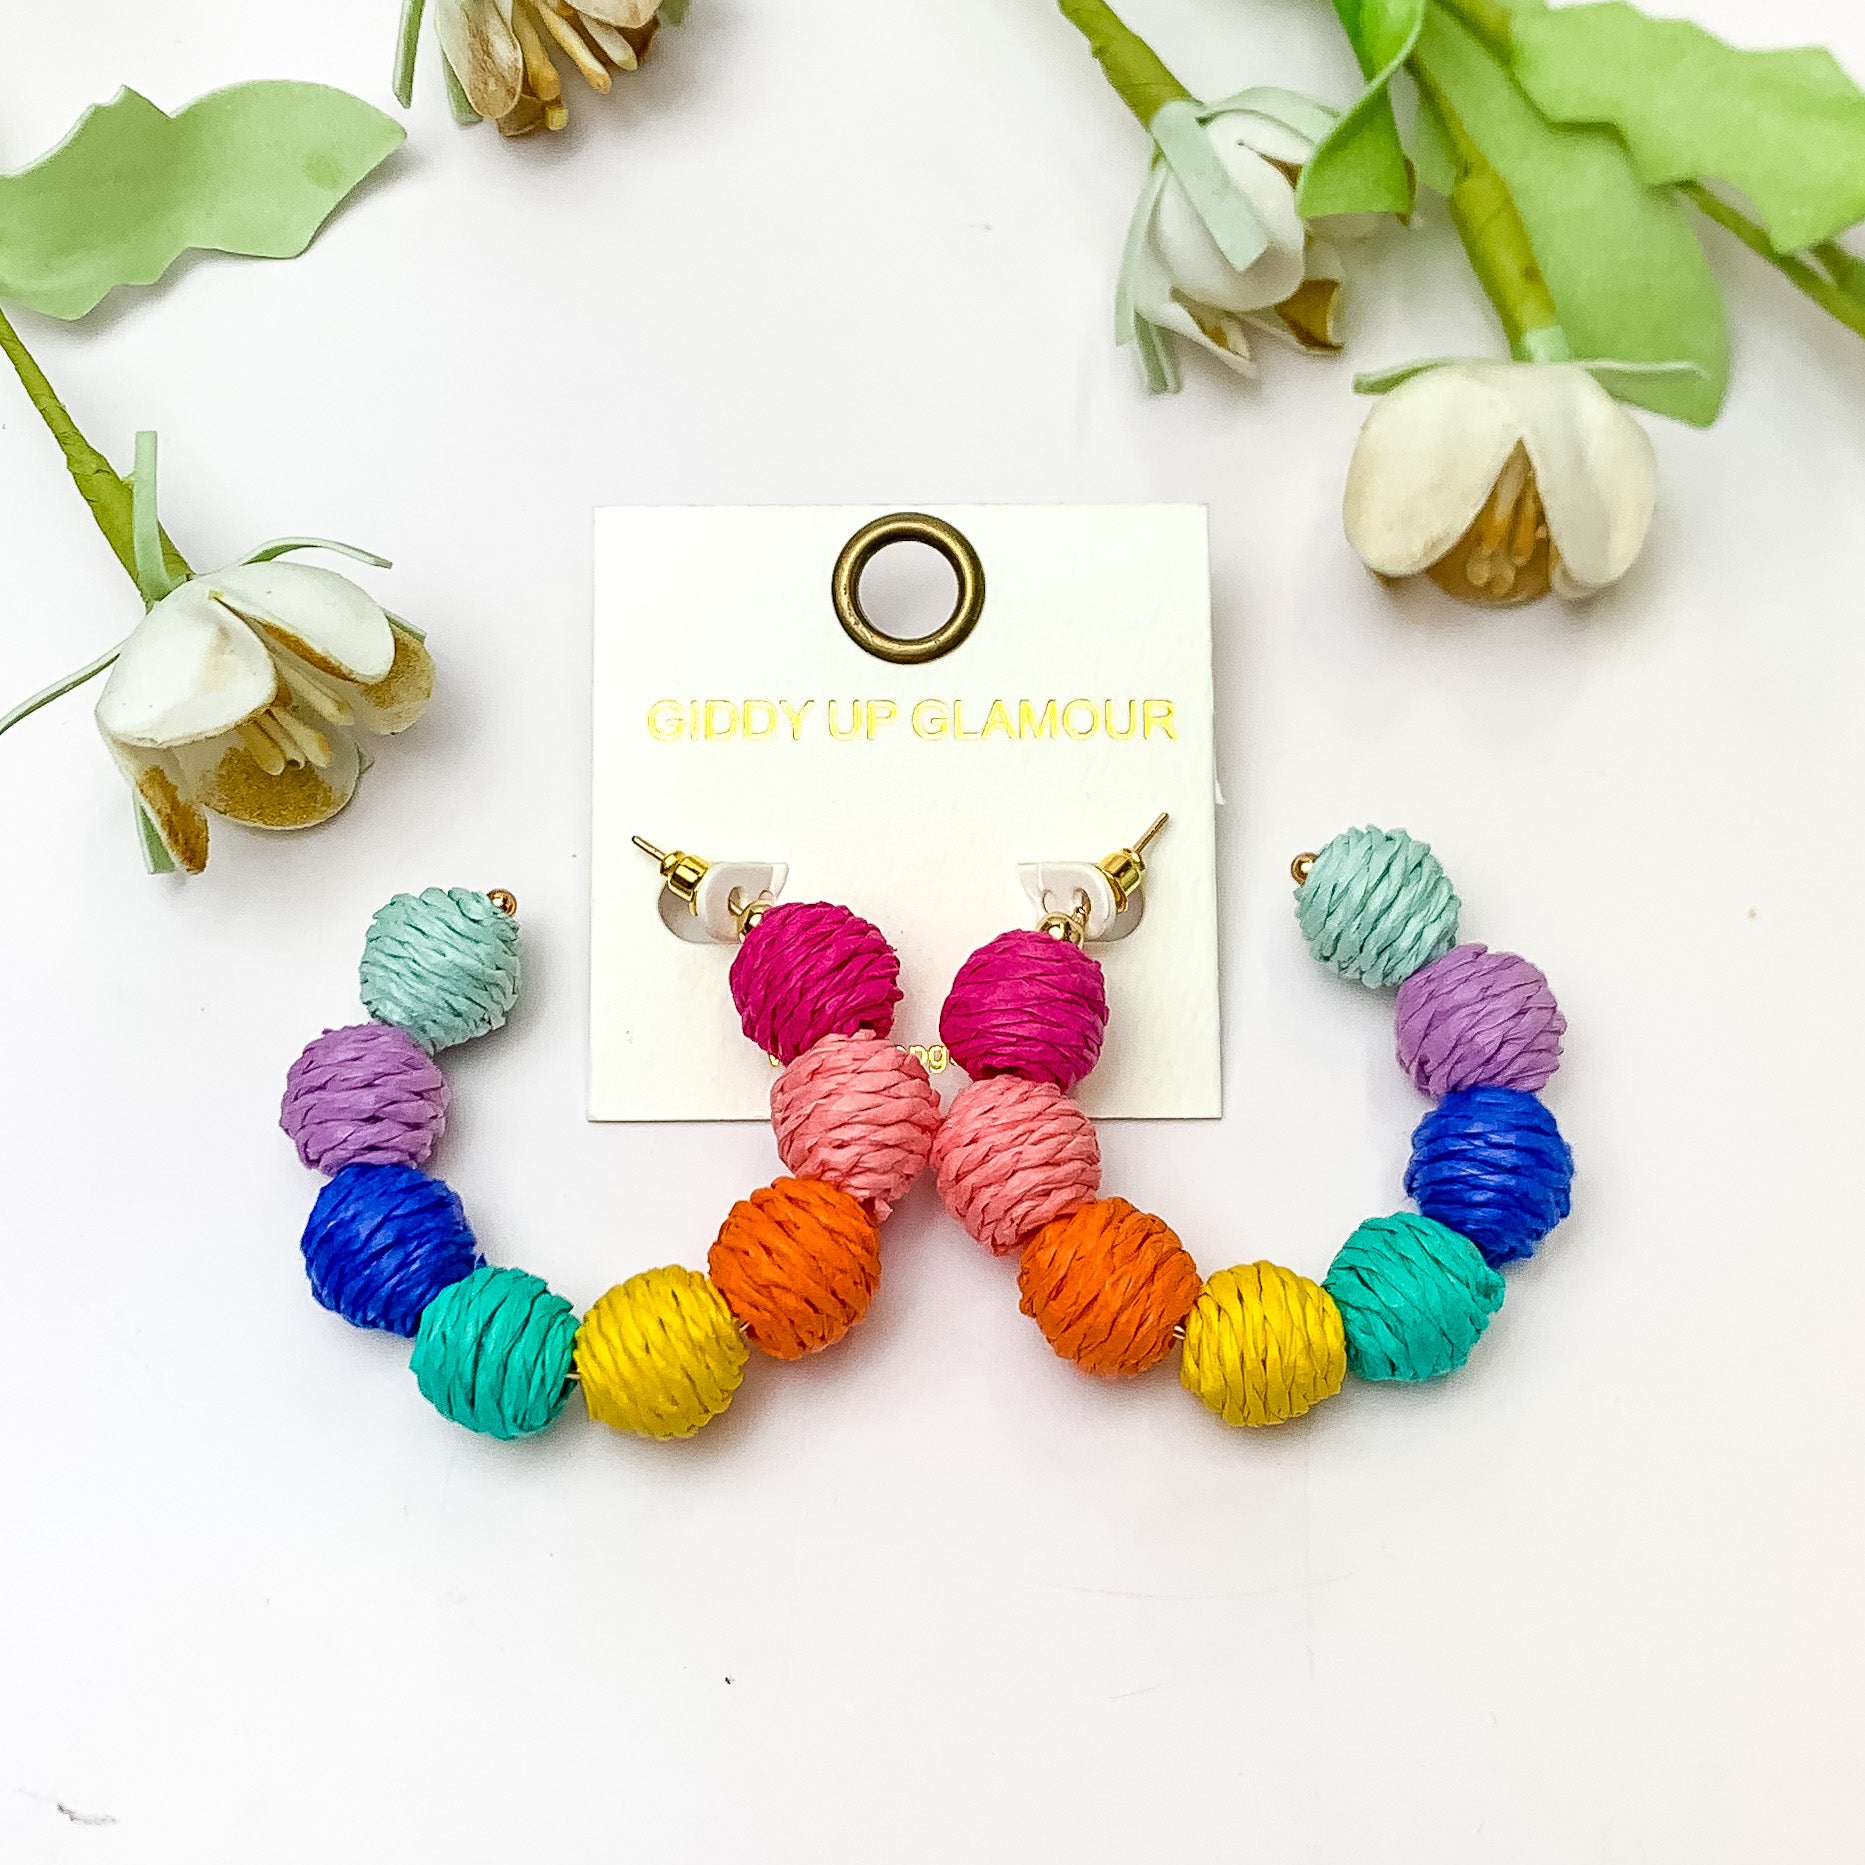 Sorbet Summer Raffia Ball Hoop Earrings in Multicolor. Pictured on a white background with flowers laying above the earrings.